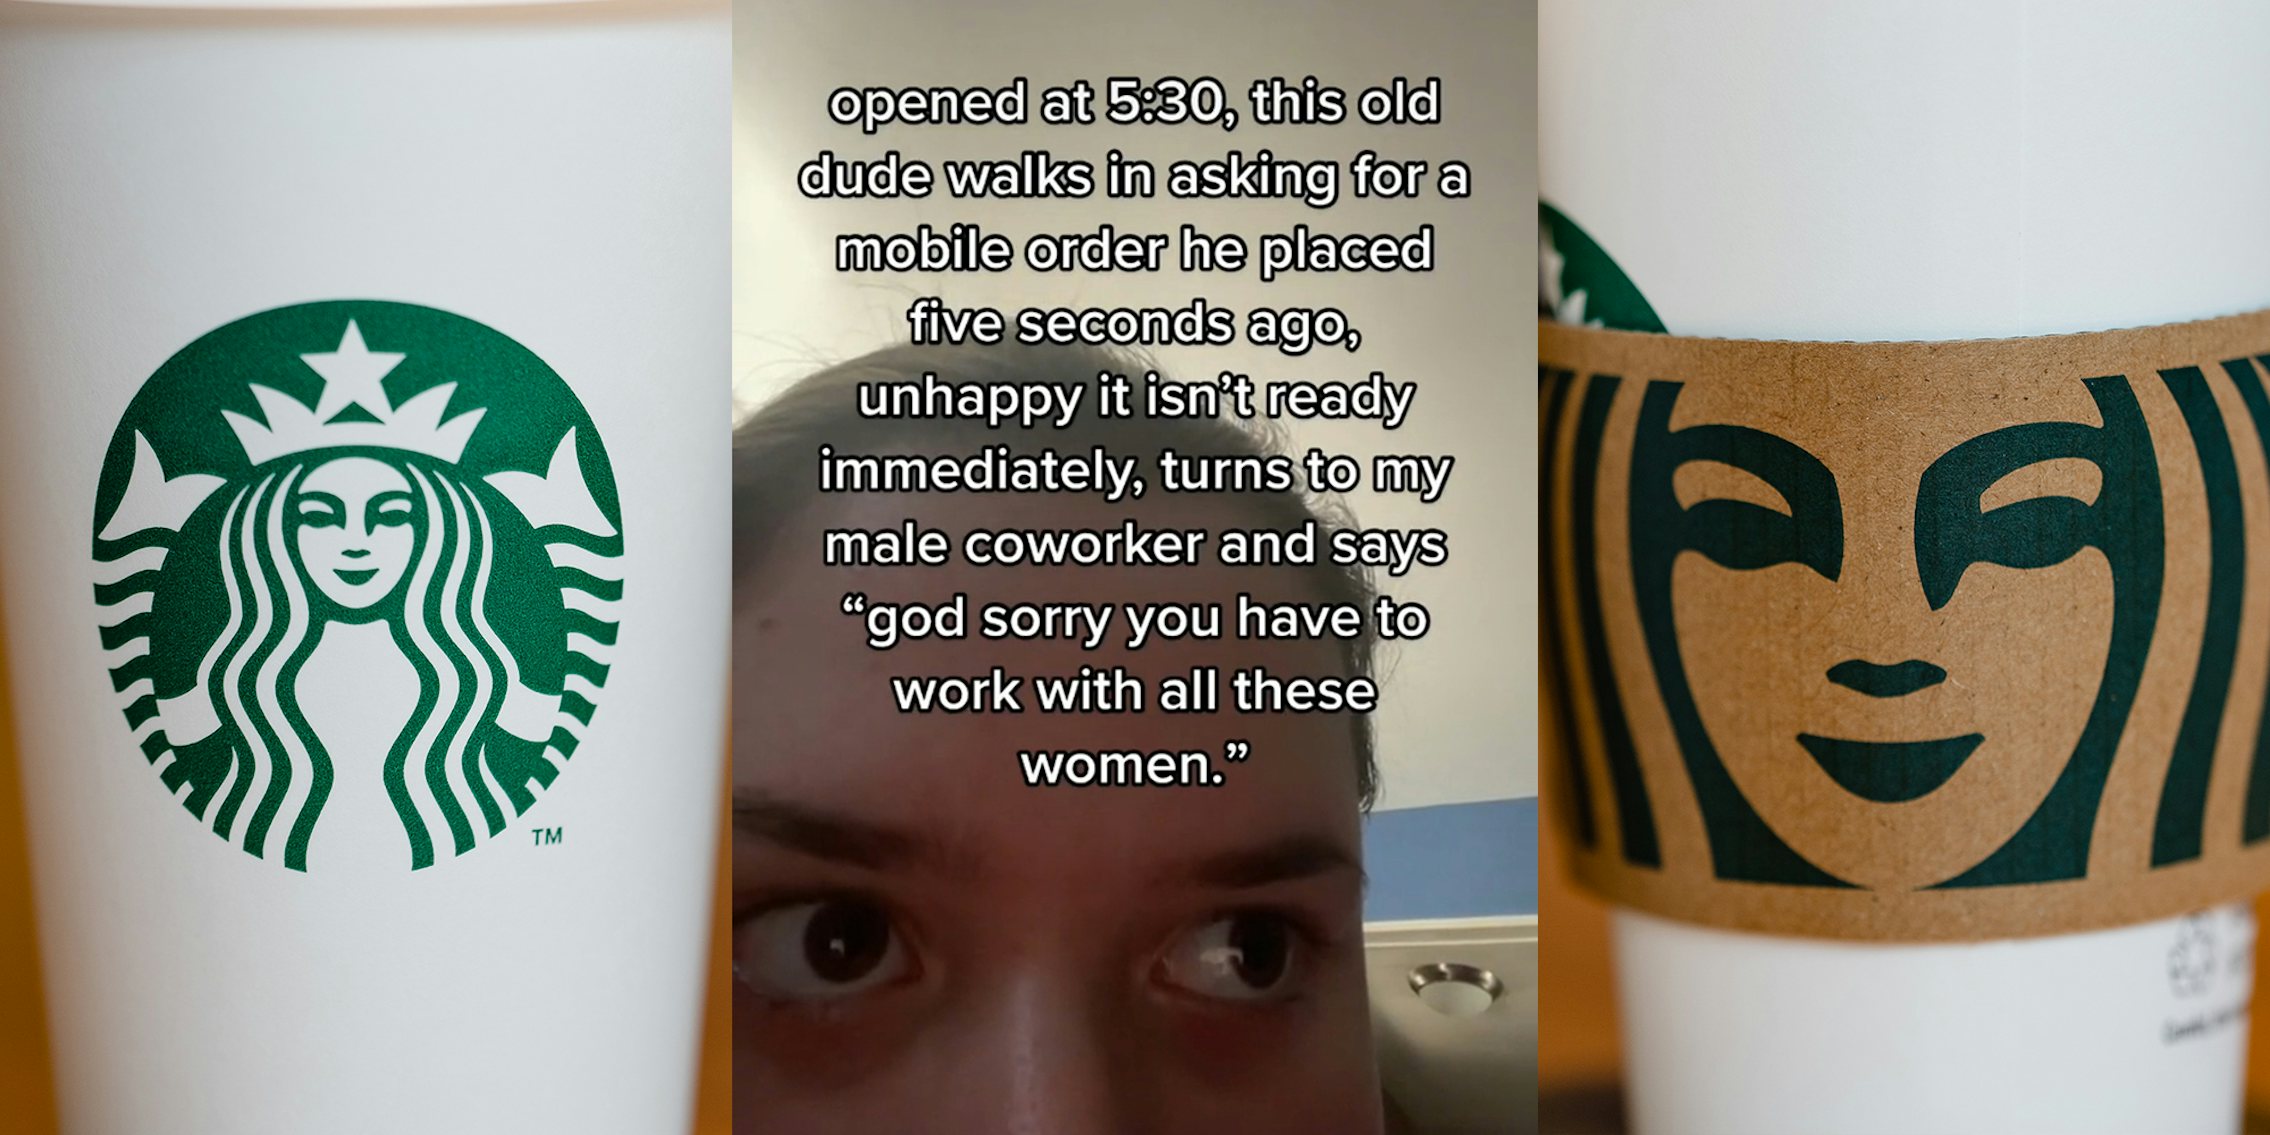 starbucks cup (l) young woman with caption 'opened at 5:30, this old dude walks in asking for a mobile order he placed five seconds ago, unhappy it isn't ready immediately, turns to my male coworker and says 'god sorry you have to work with all these women.' (c) starbucks cup (r)